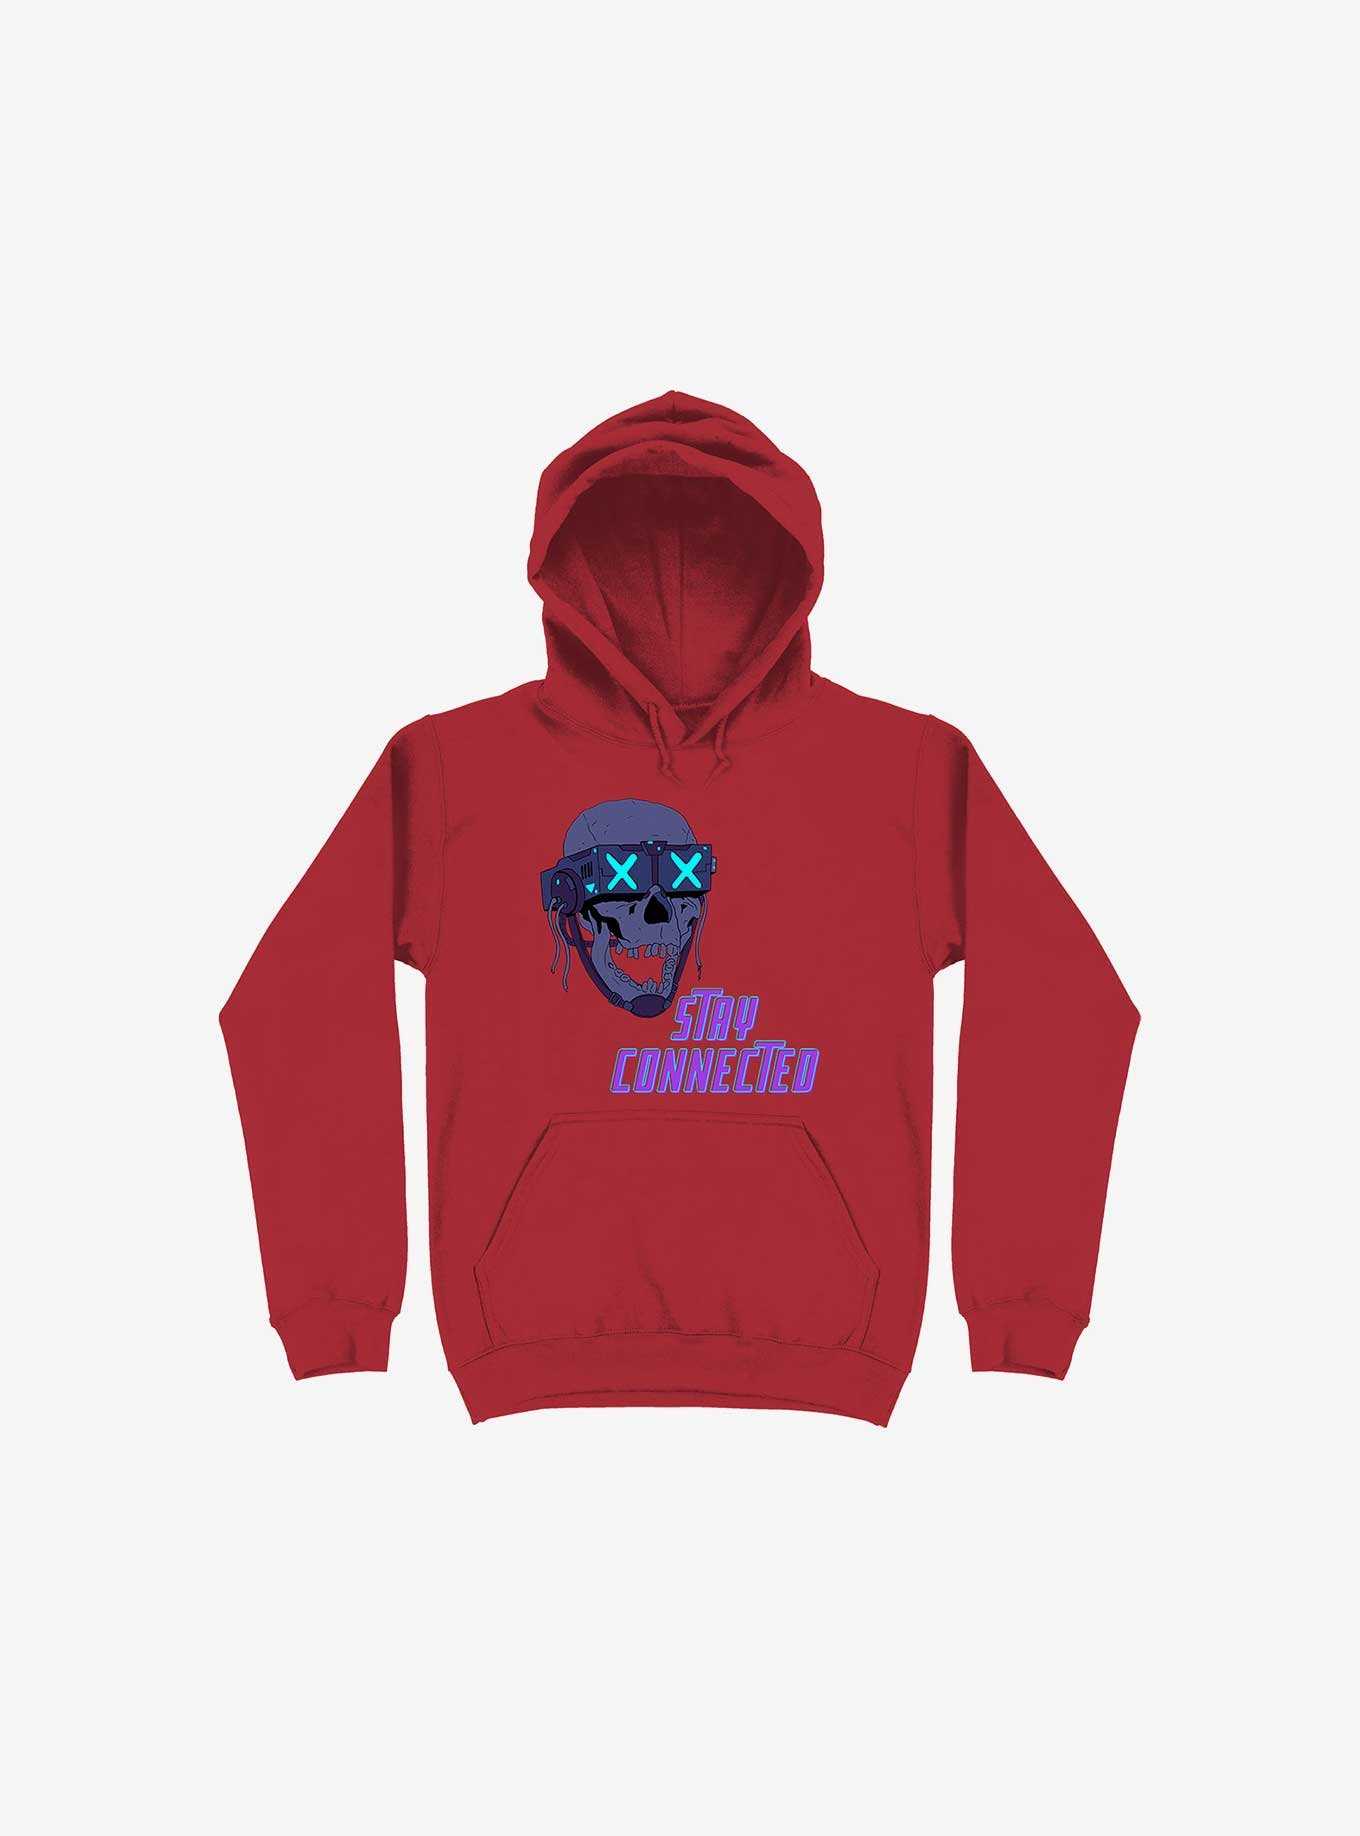 Stay_Connected 2.0 Red Hoodie, , hi-res